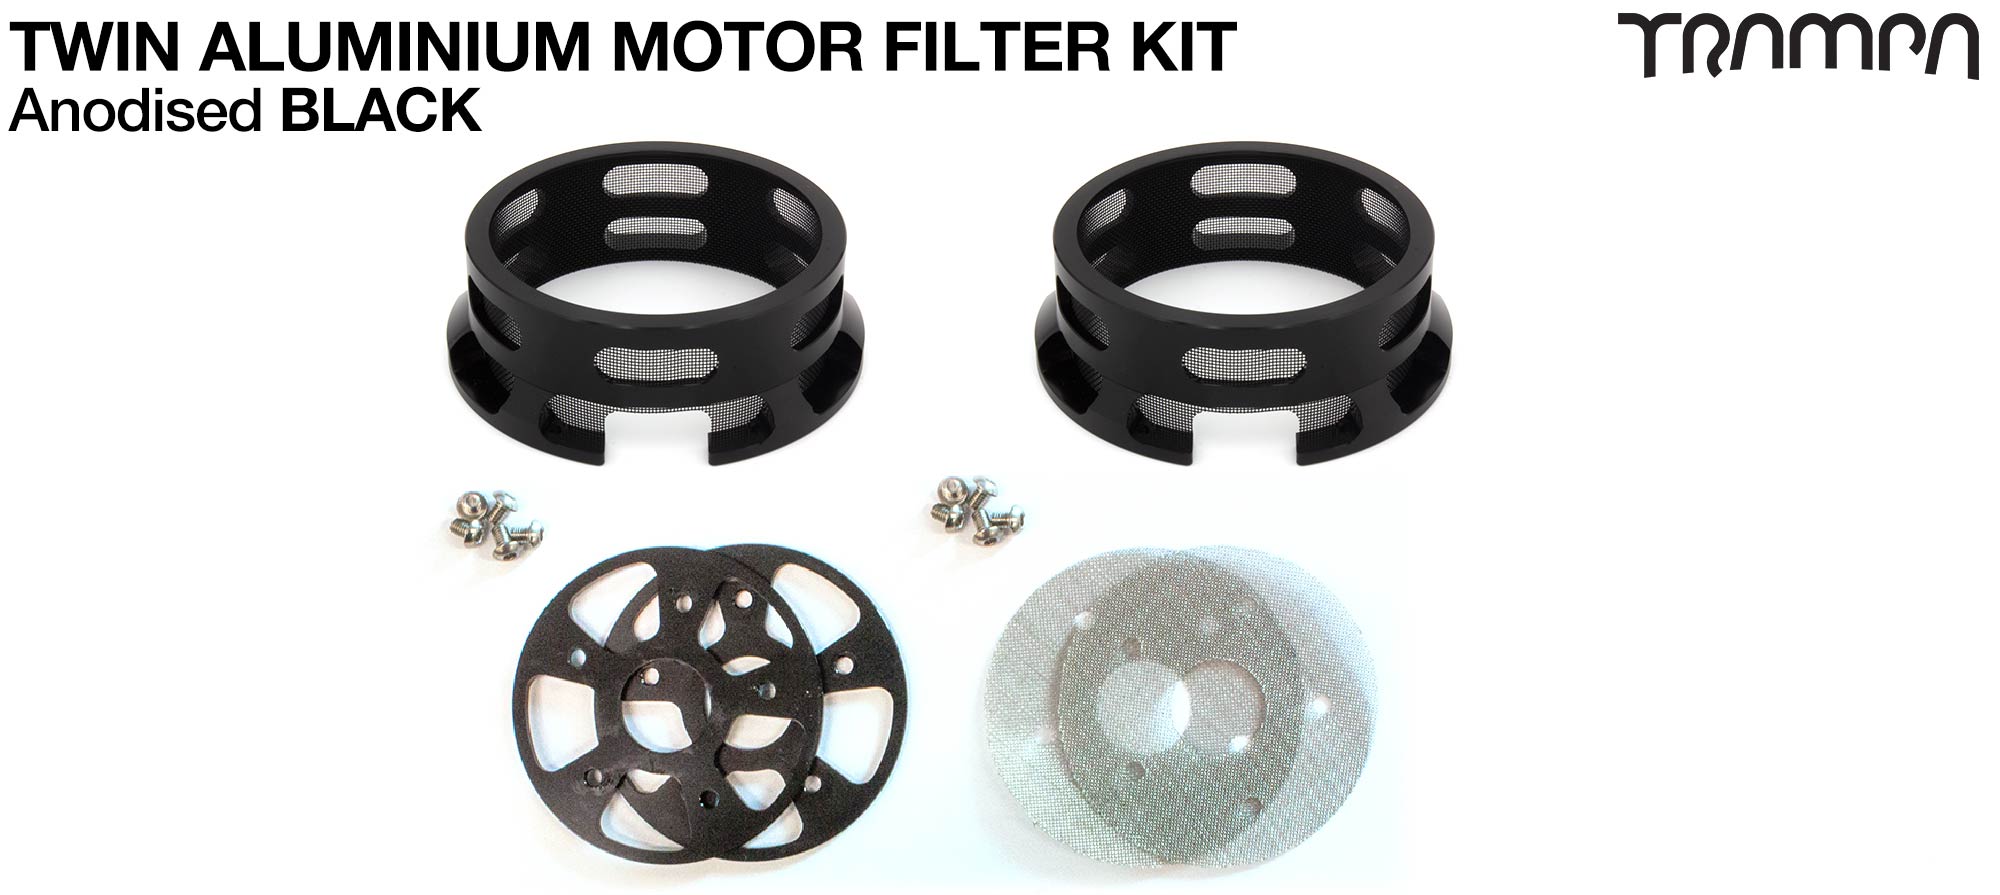 HALF CAGE Motor protection  - BLACK anodised with Filter & Fan - TWIN